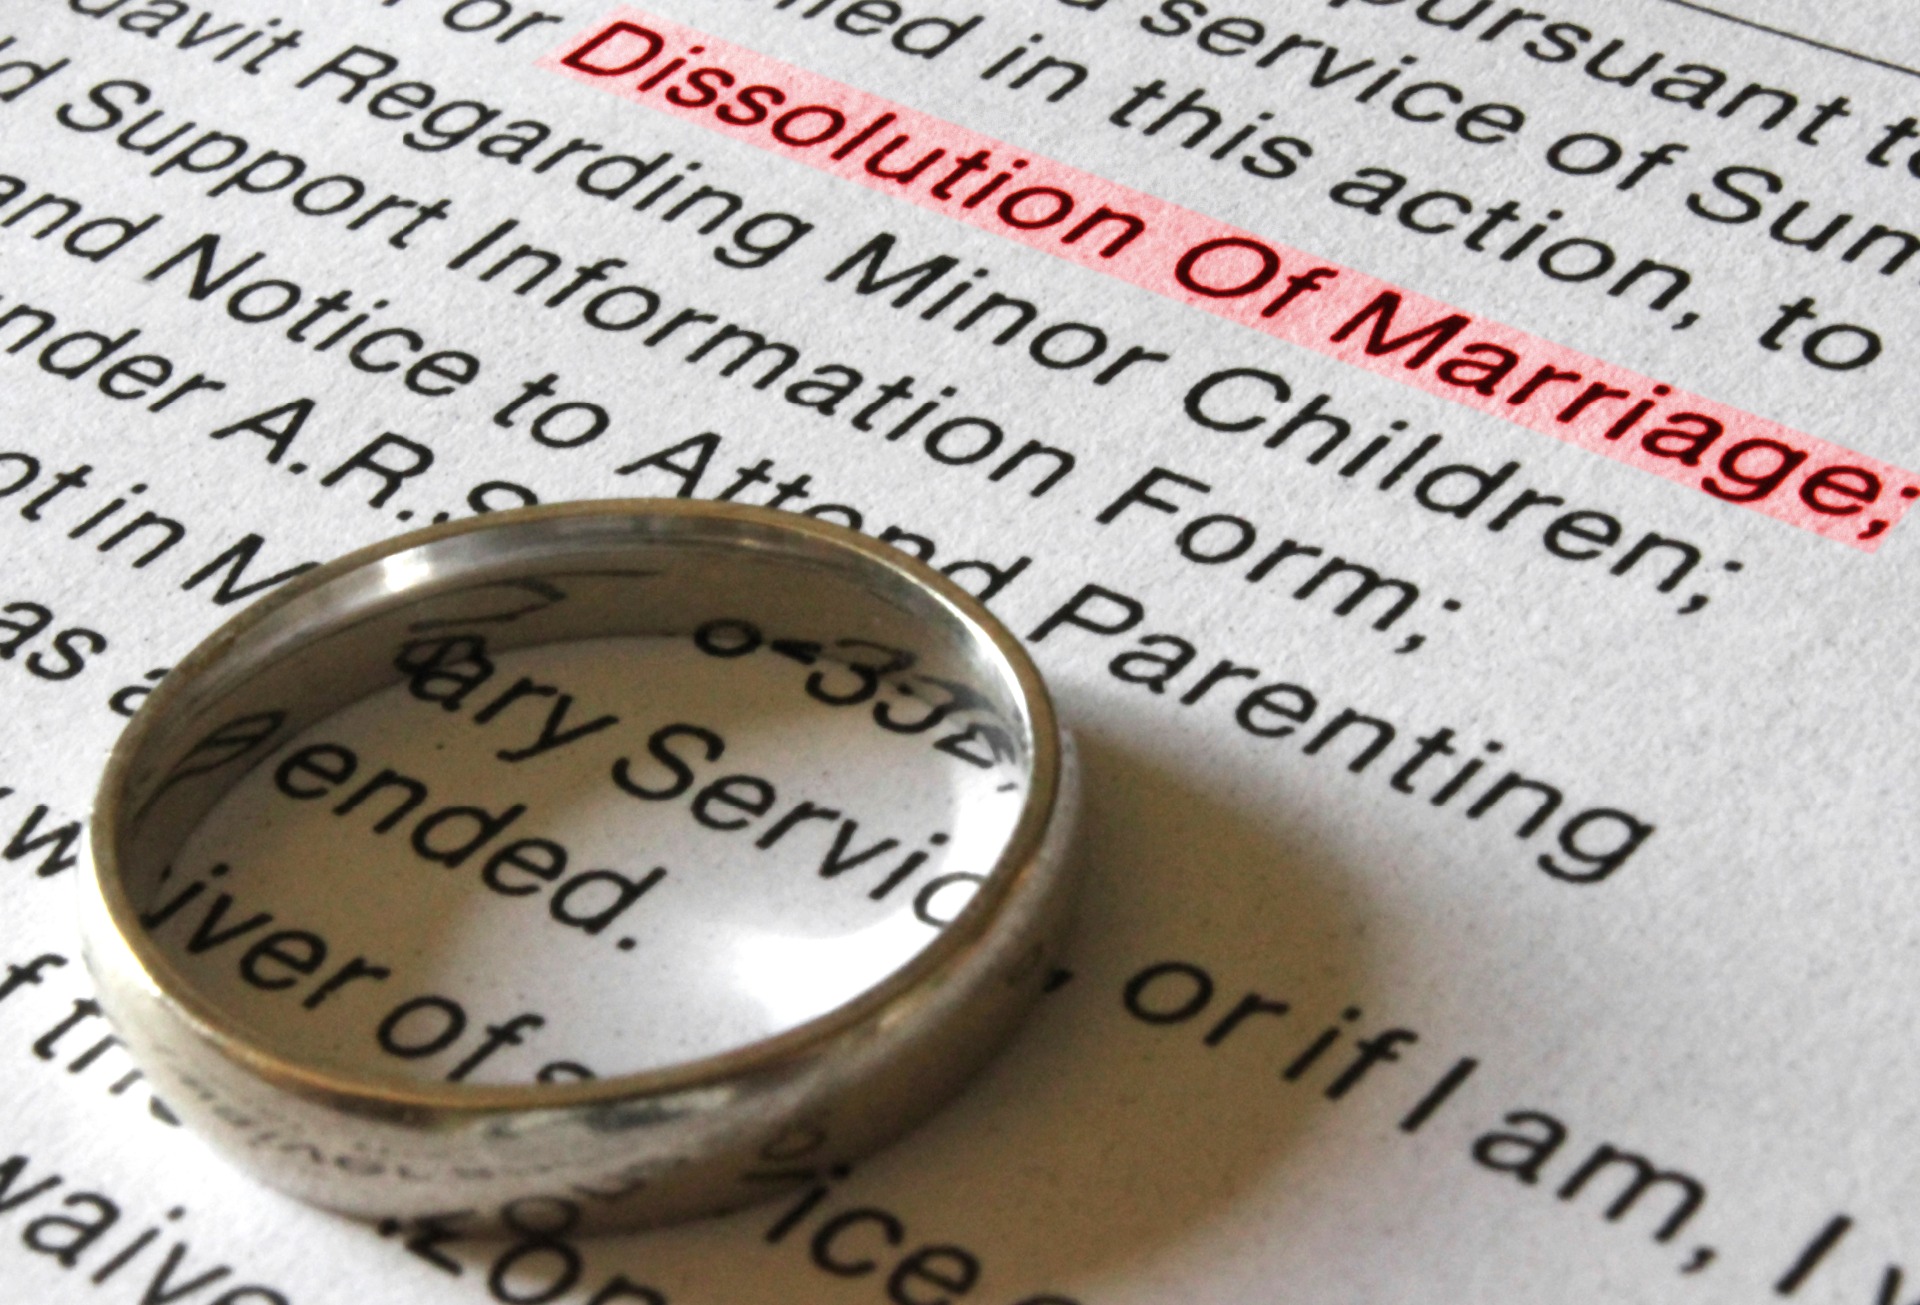 Gold wedding ring placed on divorce paperwork with Dissolution of Marriage highlighted